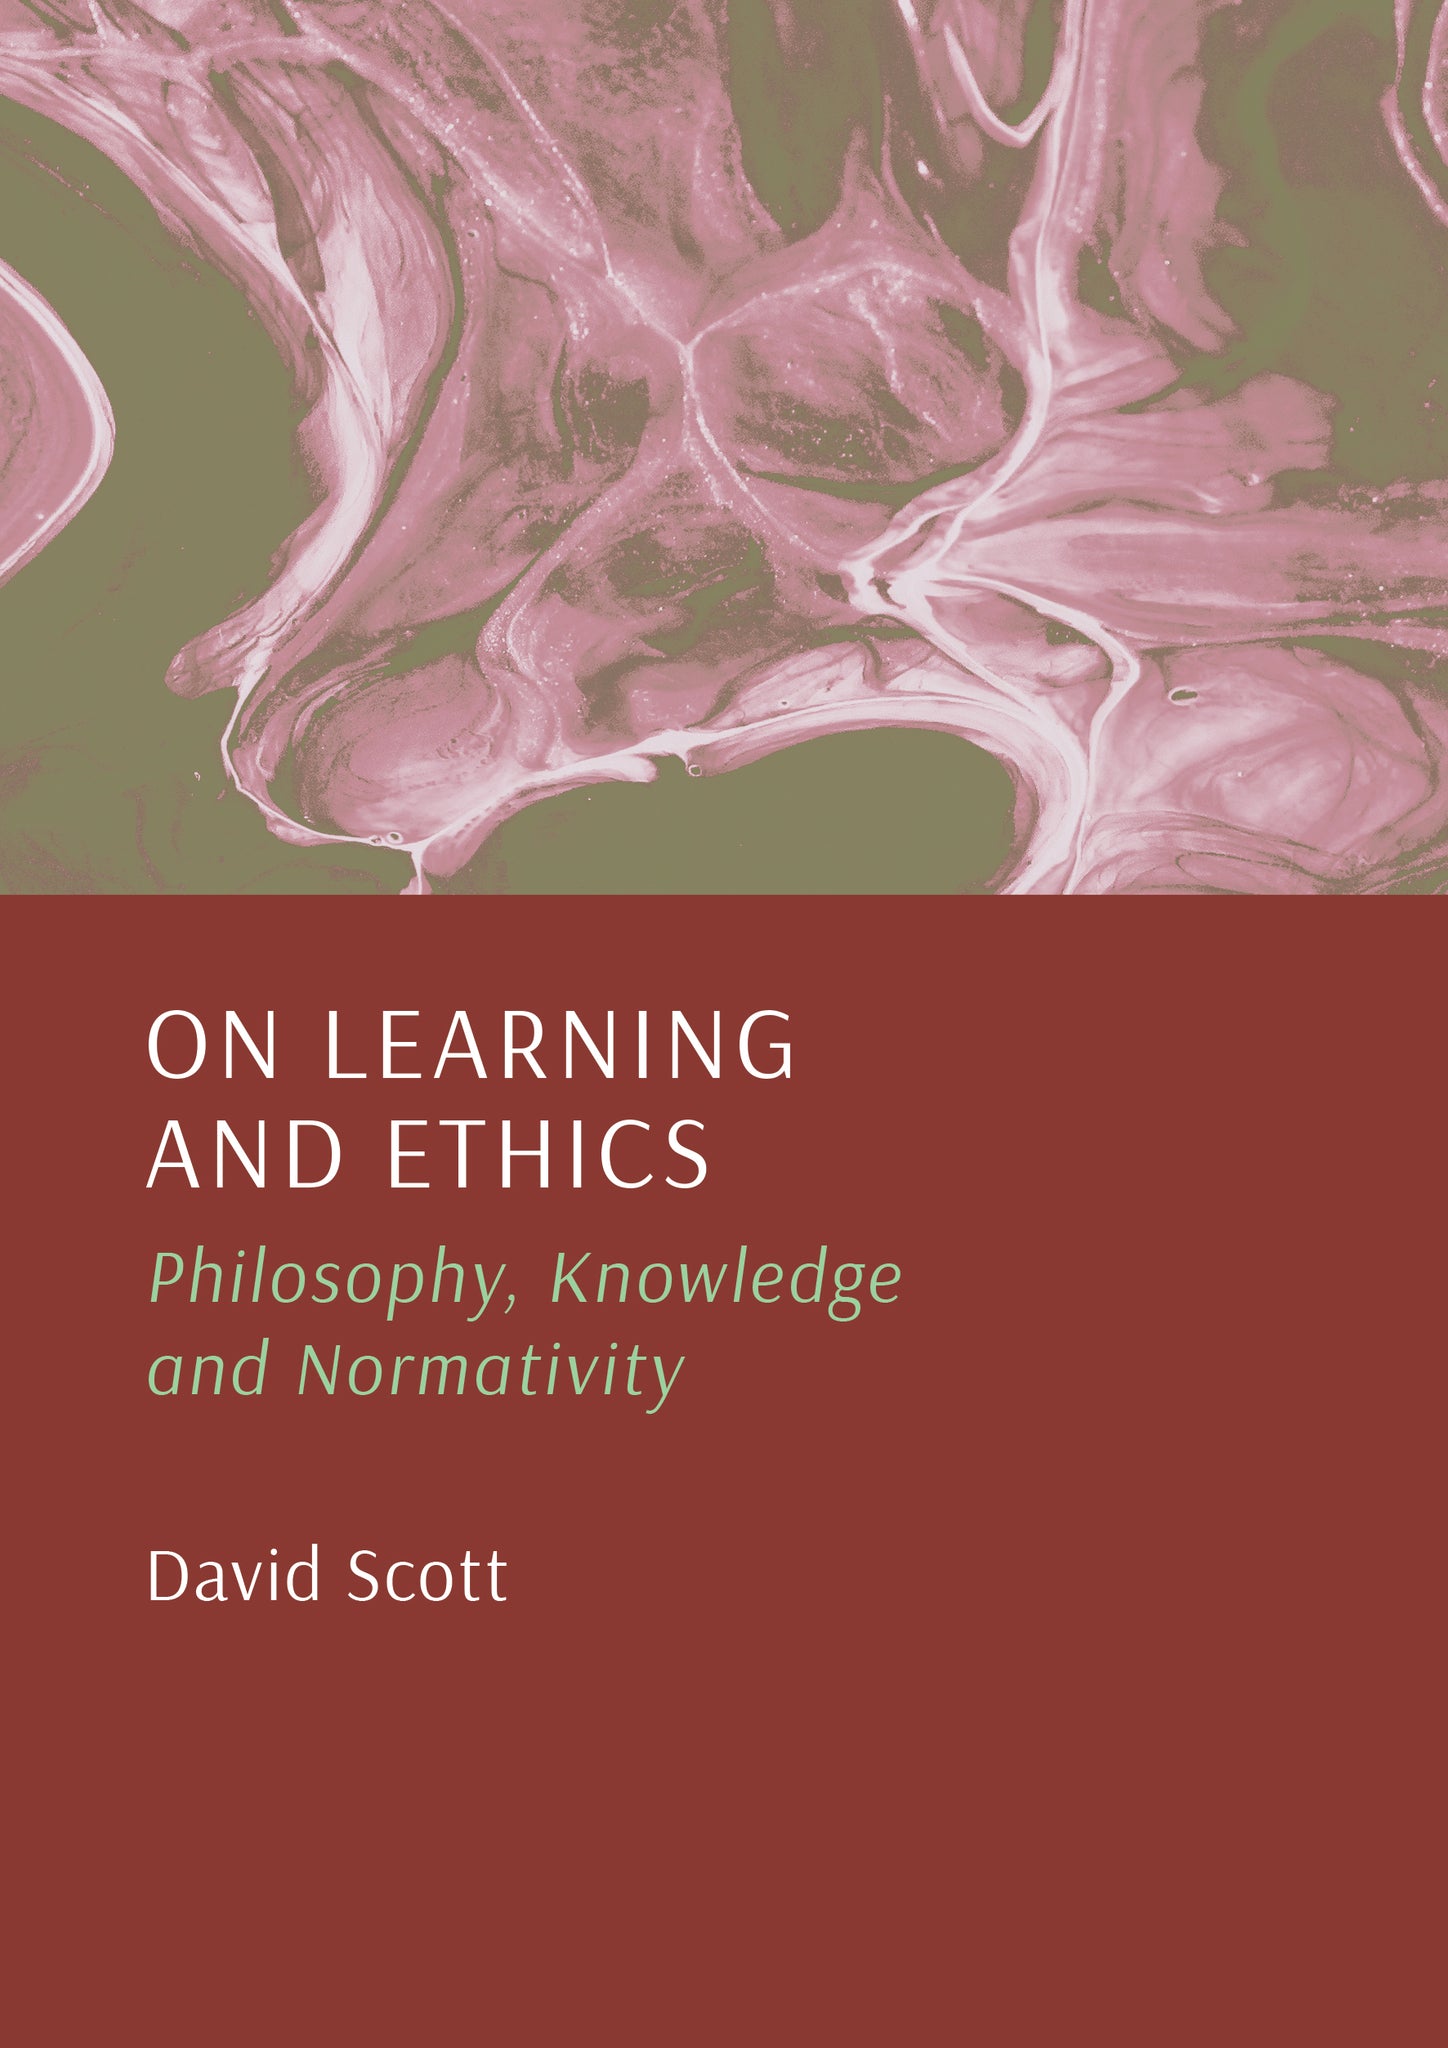 On Learning and Ethics: Philosophy, Knowledge and Normativity